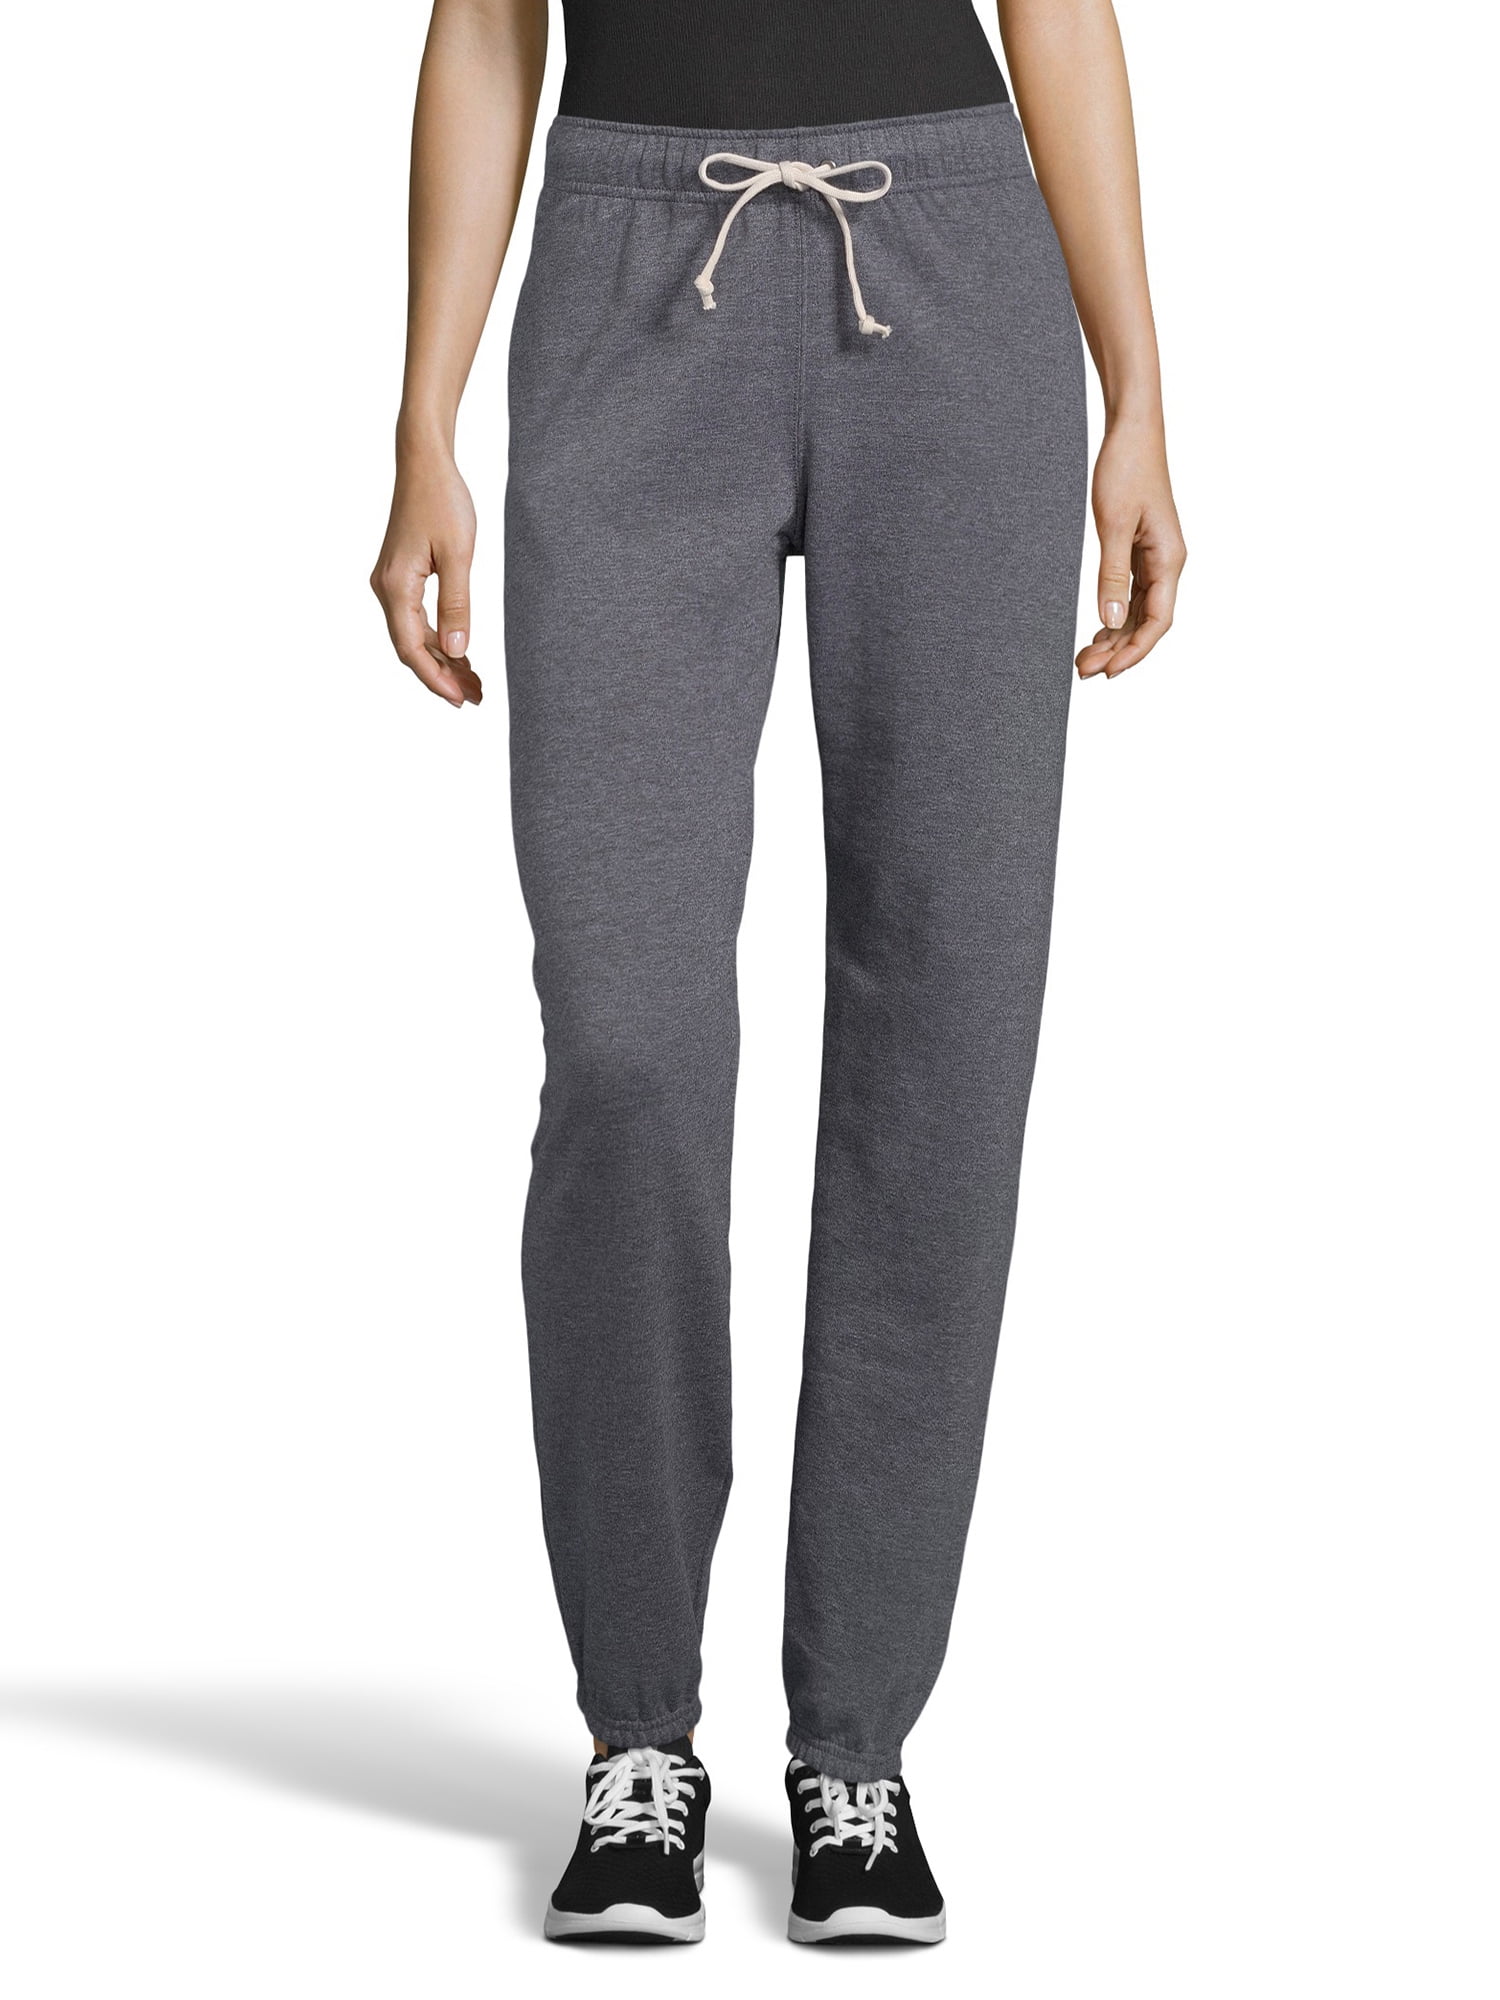 Hanes Women's Luxe Collection Lightweight Fleece Sweatpant with